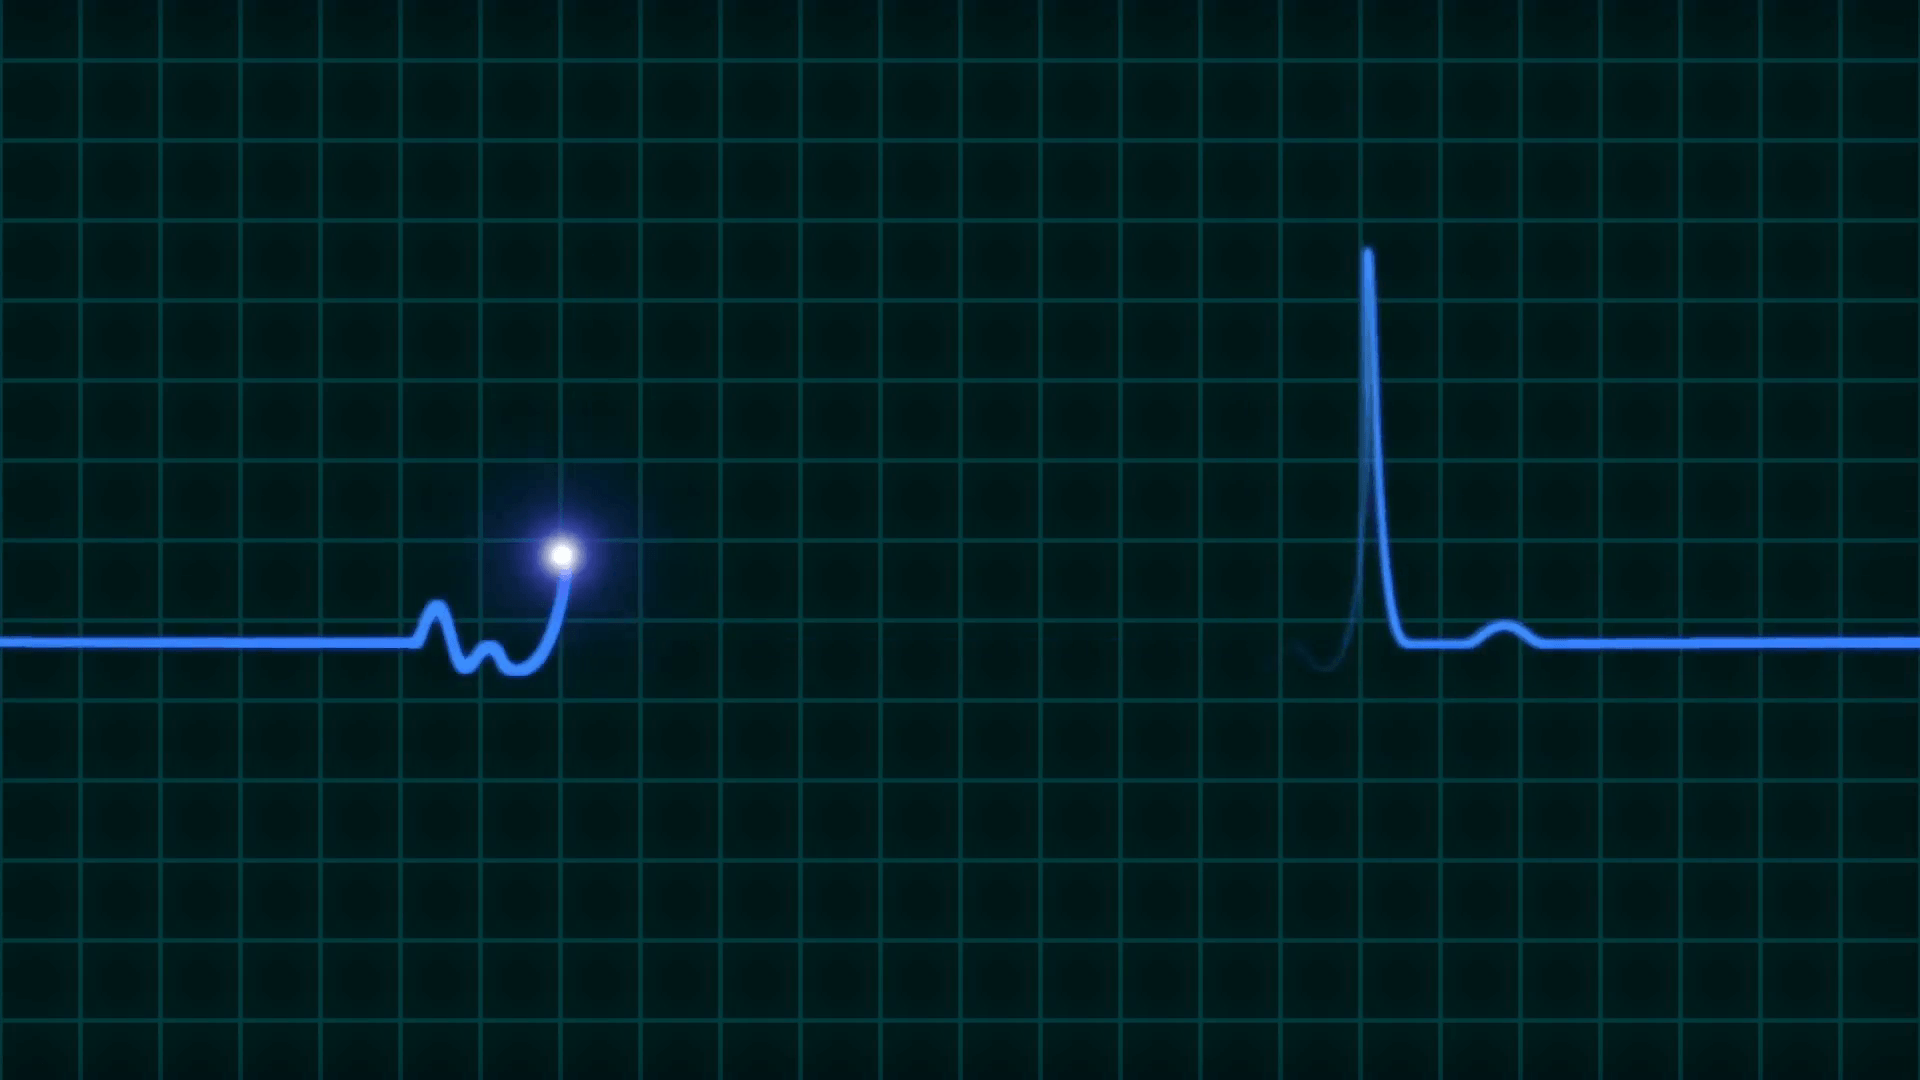 An animated EKG heartbeat monitor in blue wave line four beat